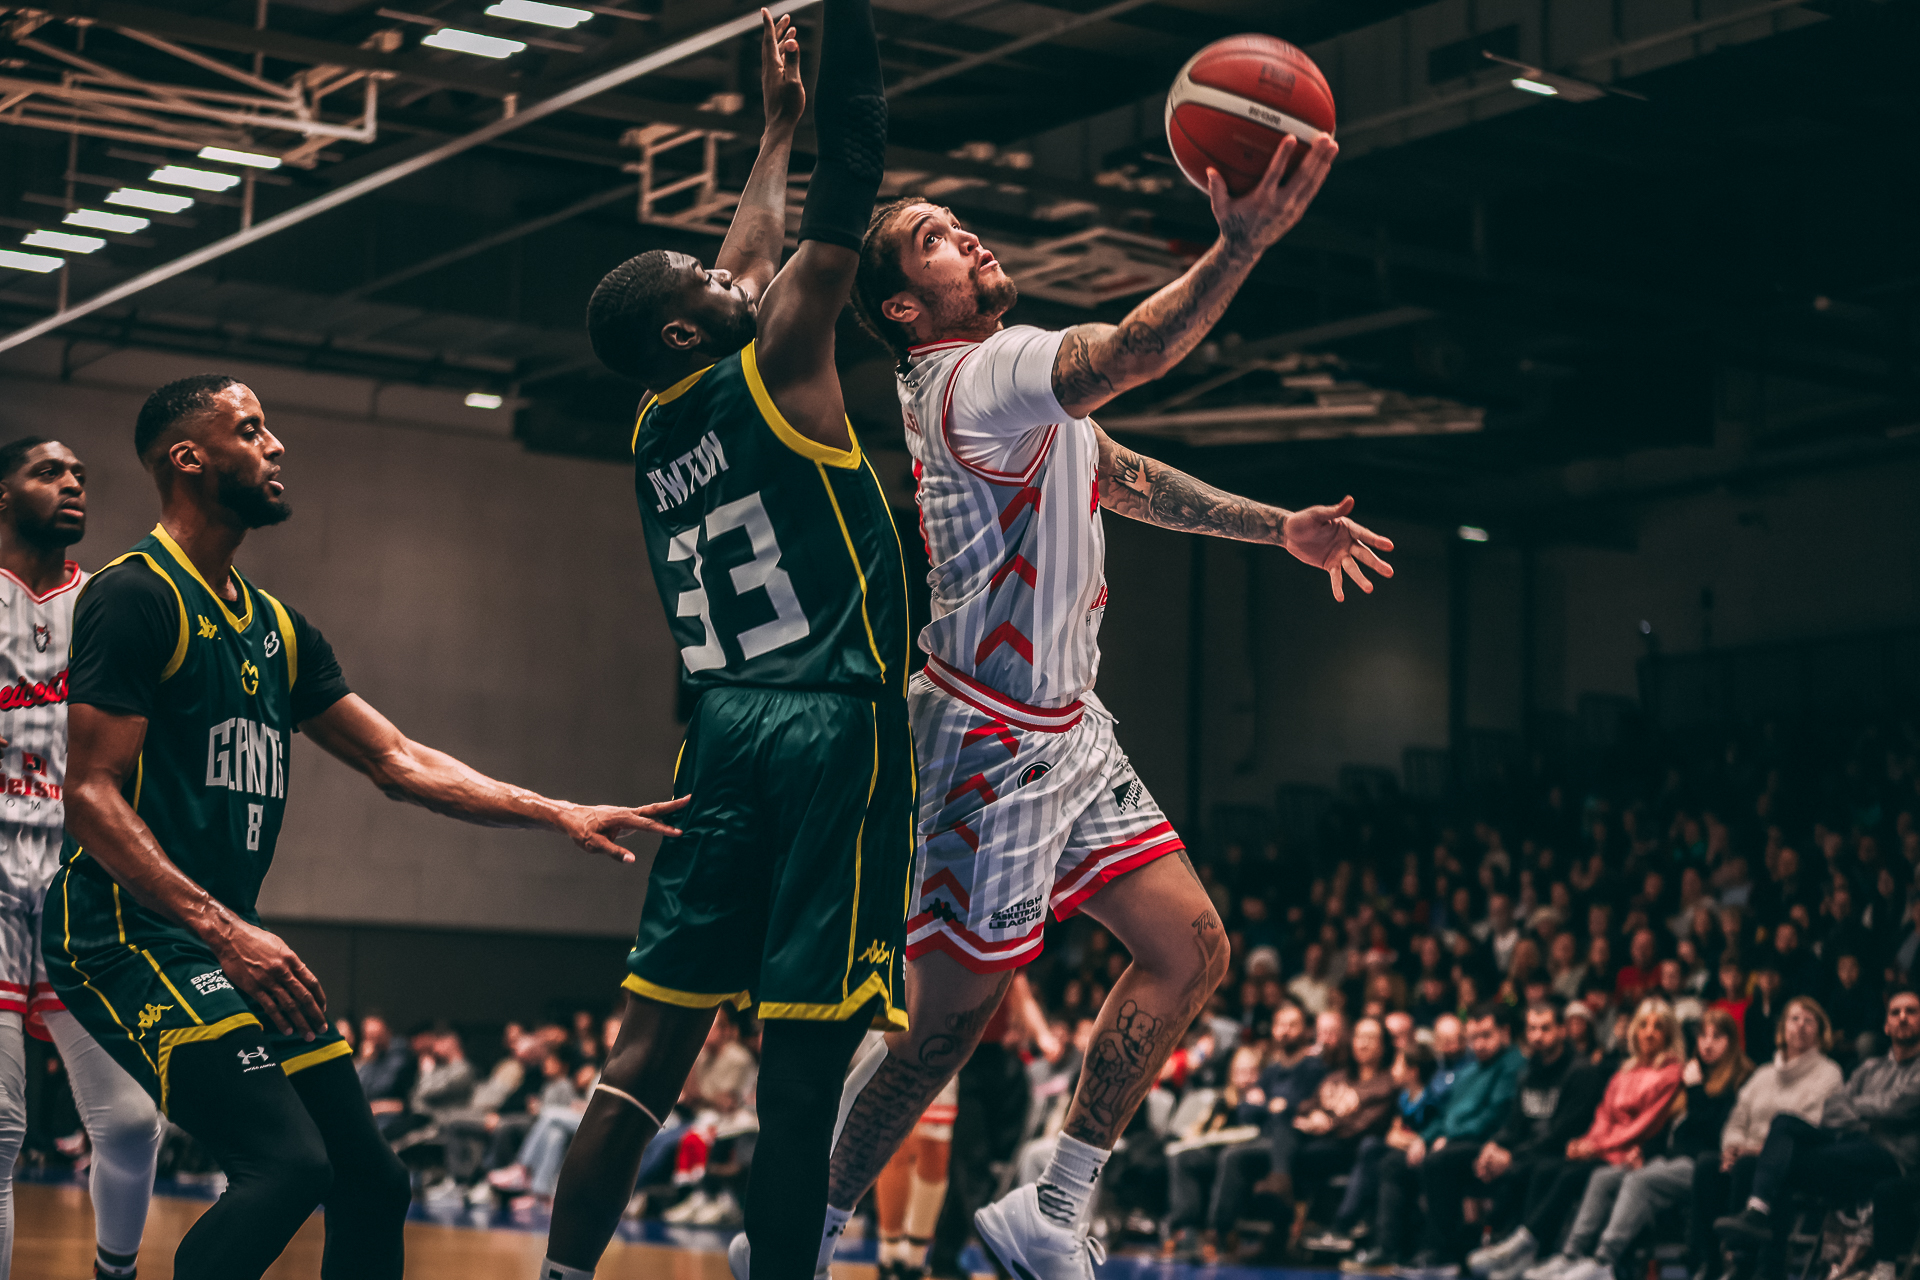 Teddy Allen makes second straight British Basketball League Team of the Week